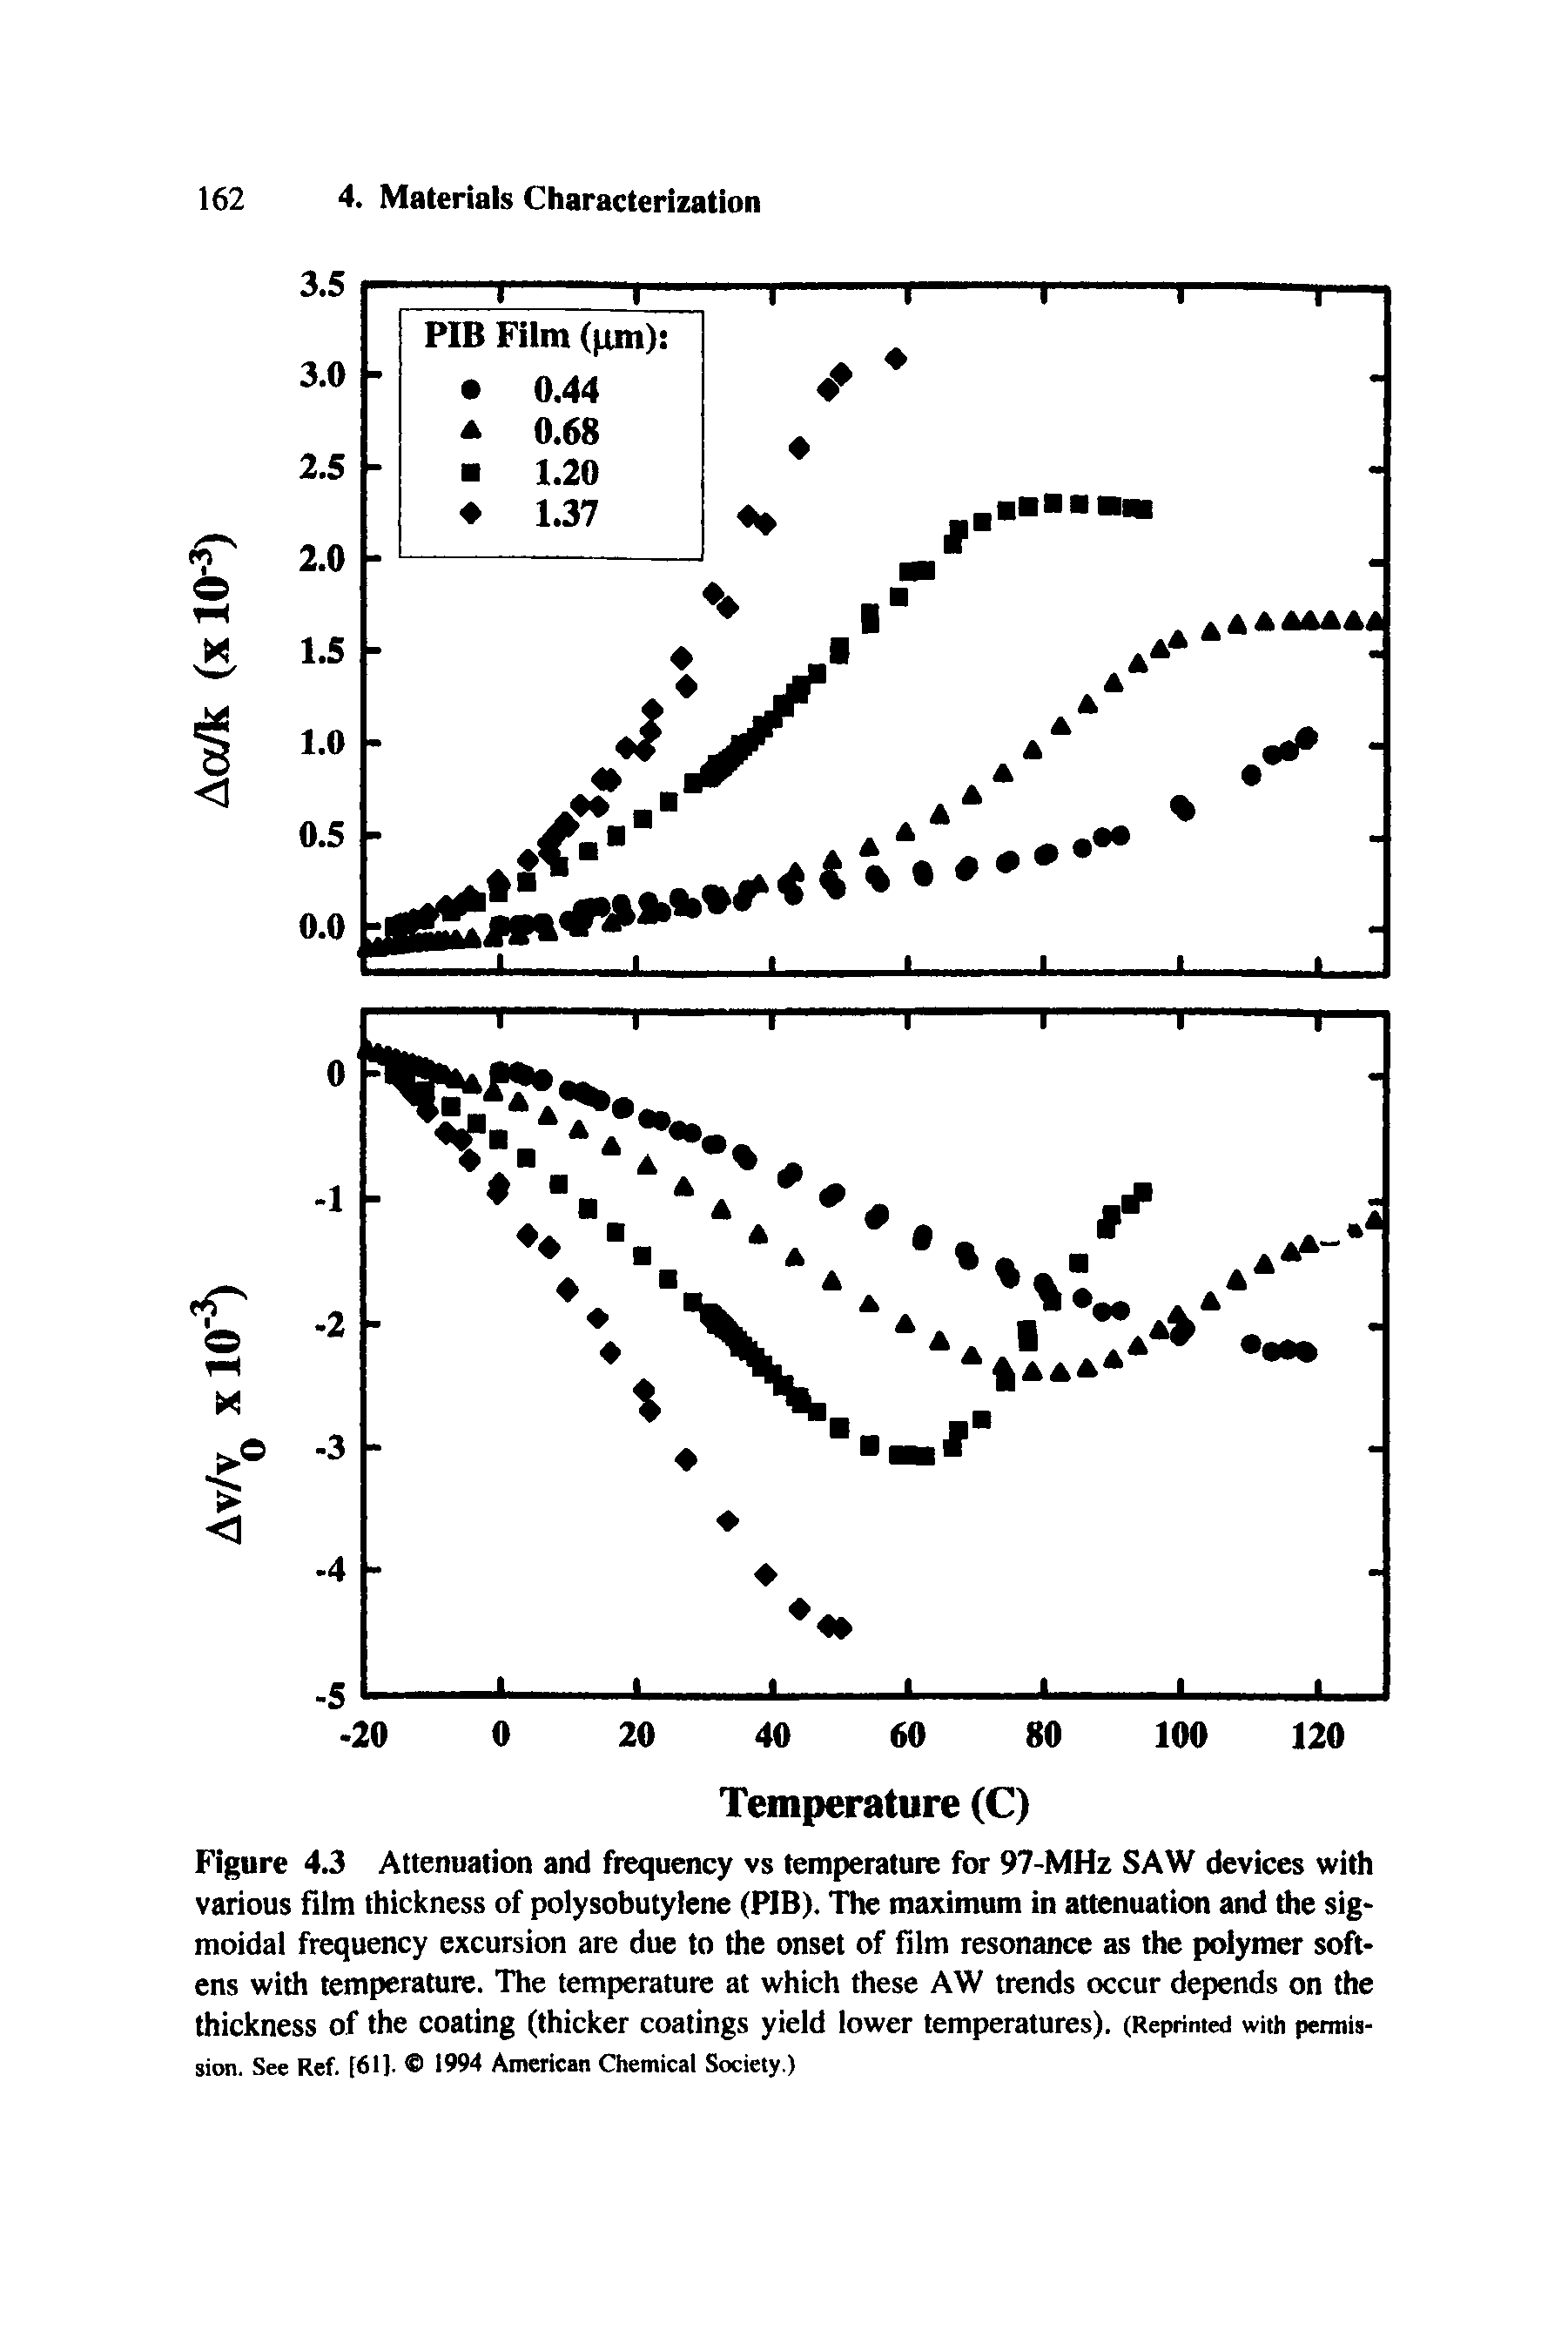 Figure Attenuation and frequency vs temperature fen- 97-MHz SAW devices with various Him thickness of polysobutylene (PIB). The maximum in attenuation and the sigmoidal frequency excursion are due to the onset of film resonance as the polymer softens with temperature. The temperature at which these AW trends occur depends on the thickness of the coating (thicker coatings yield lower temperatures). (Reprinted with pemiis-sion. See Ref. [61). 1994 American Chemical Society.)...